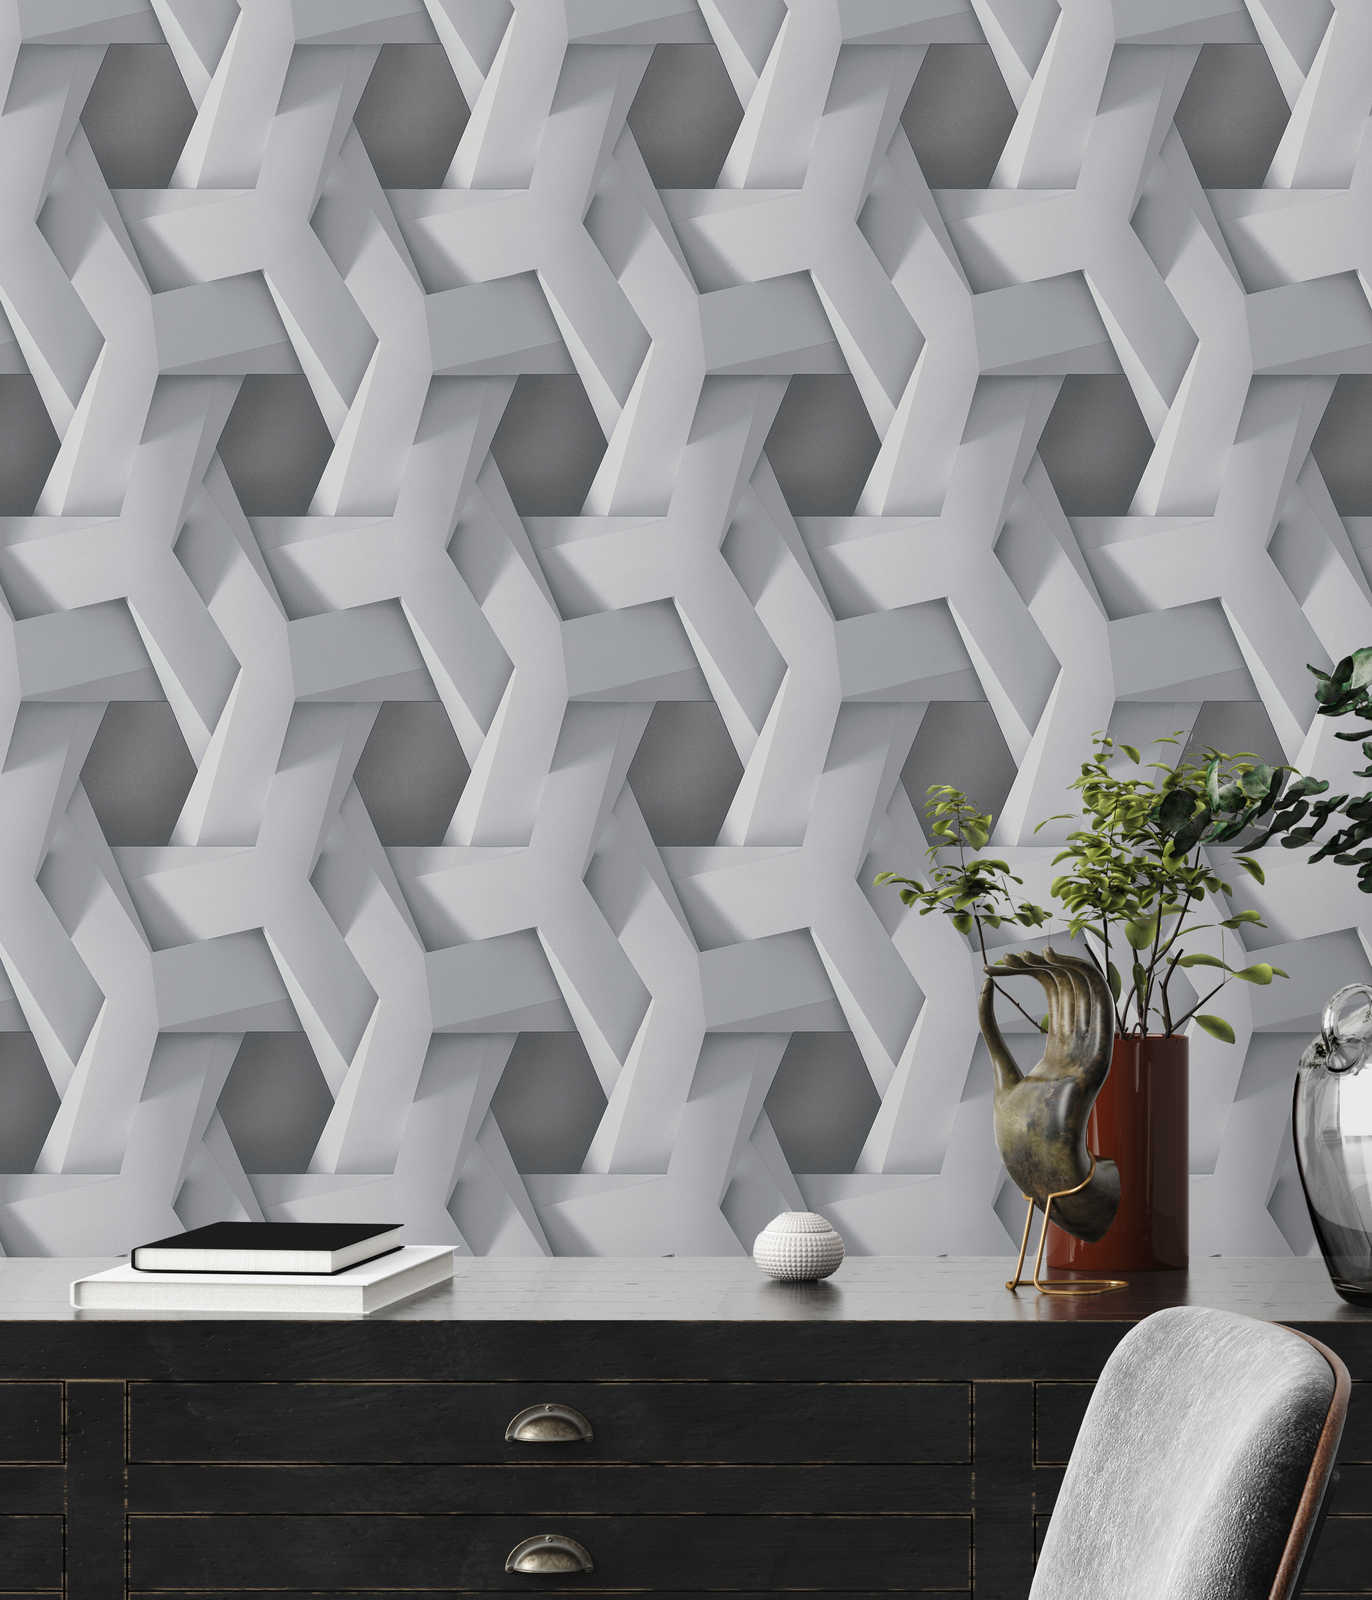             3D wallpaper grey graphic pattern with concrete look - grey
        